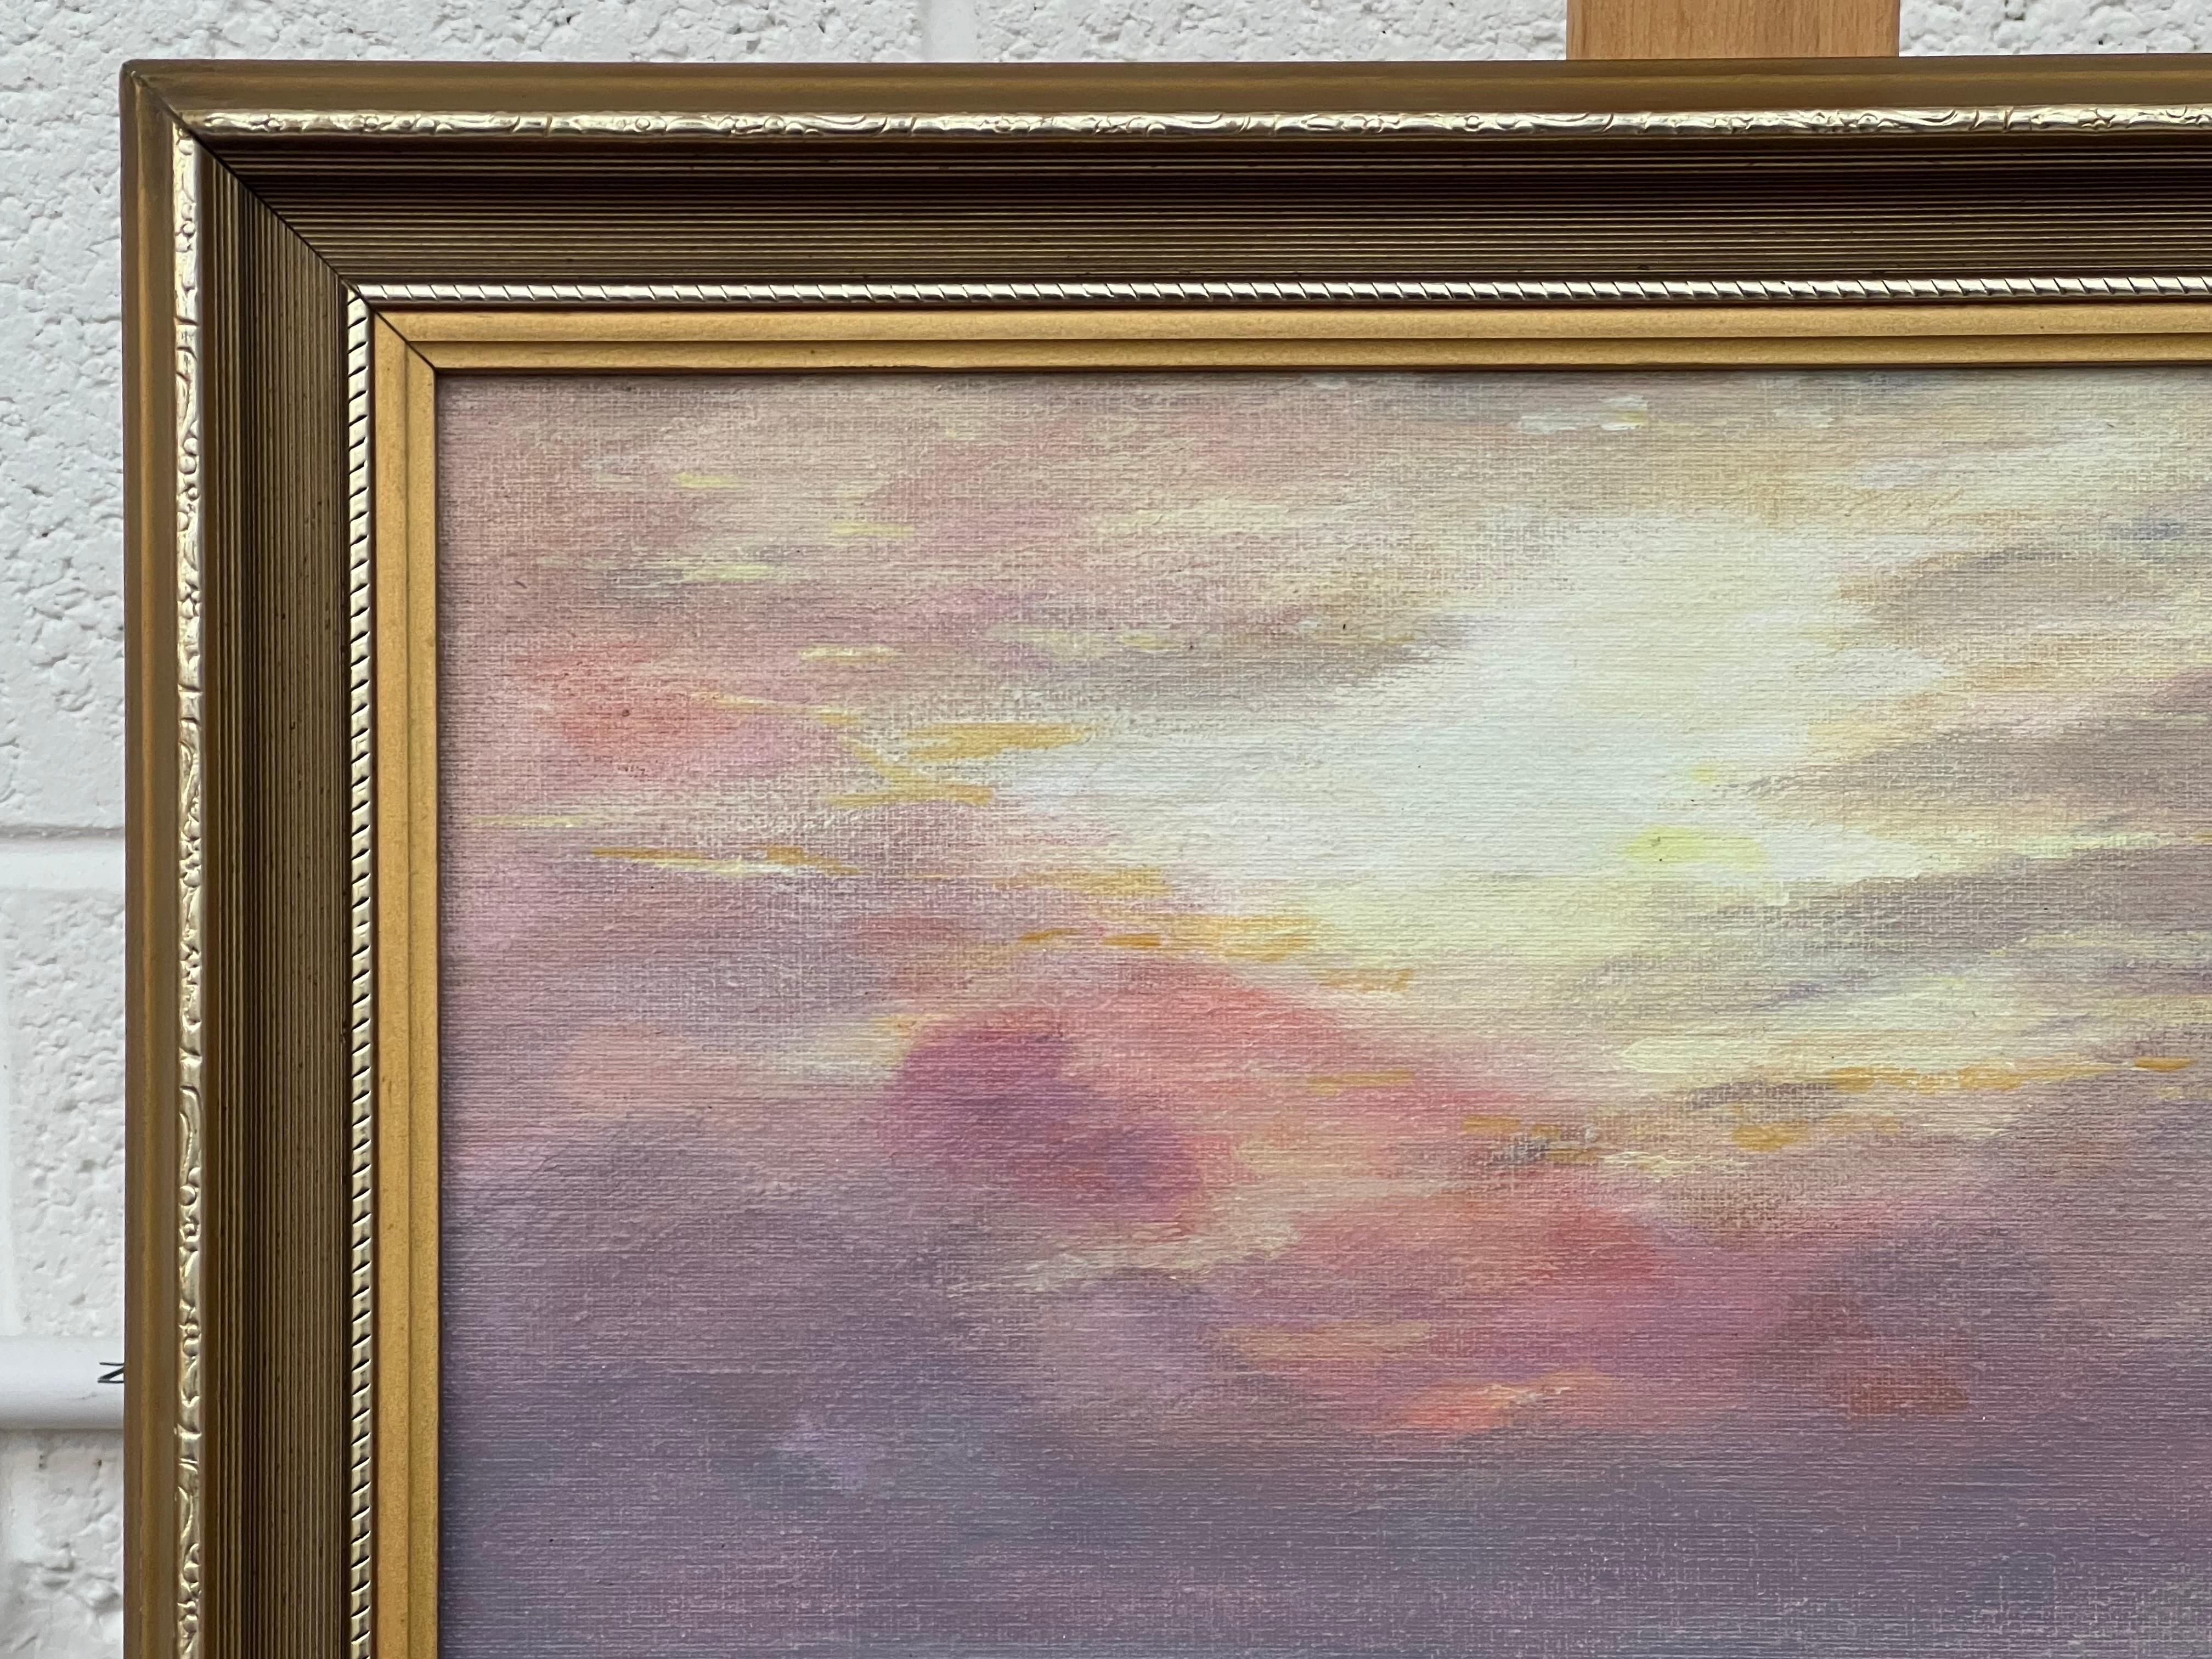 Dawn Seascape Painting with Pink Sky and Waves by 20th Century British Artist For Sale 2